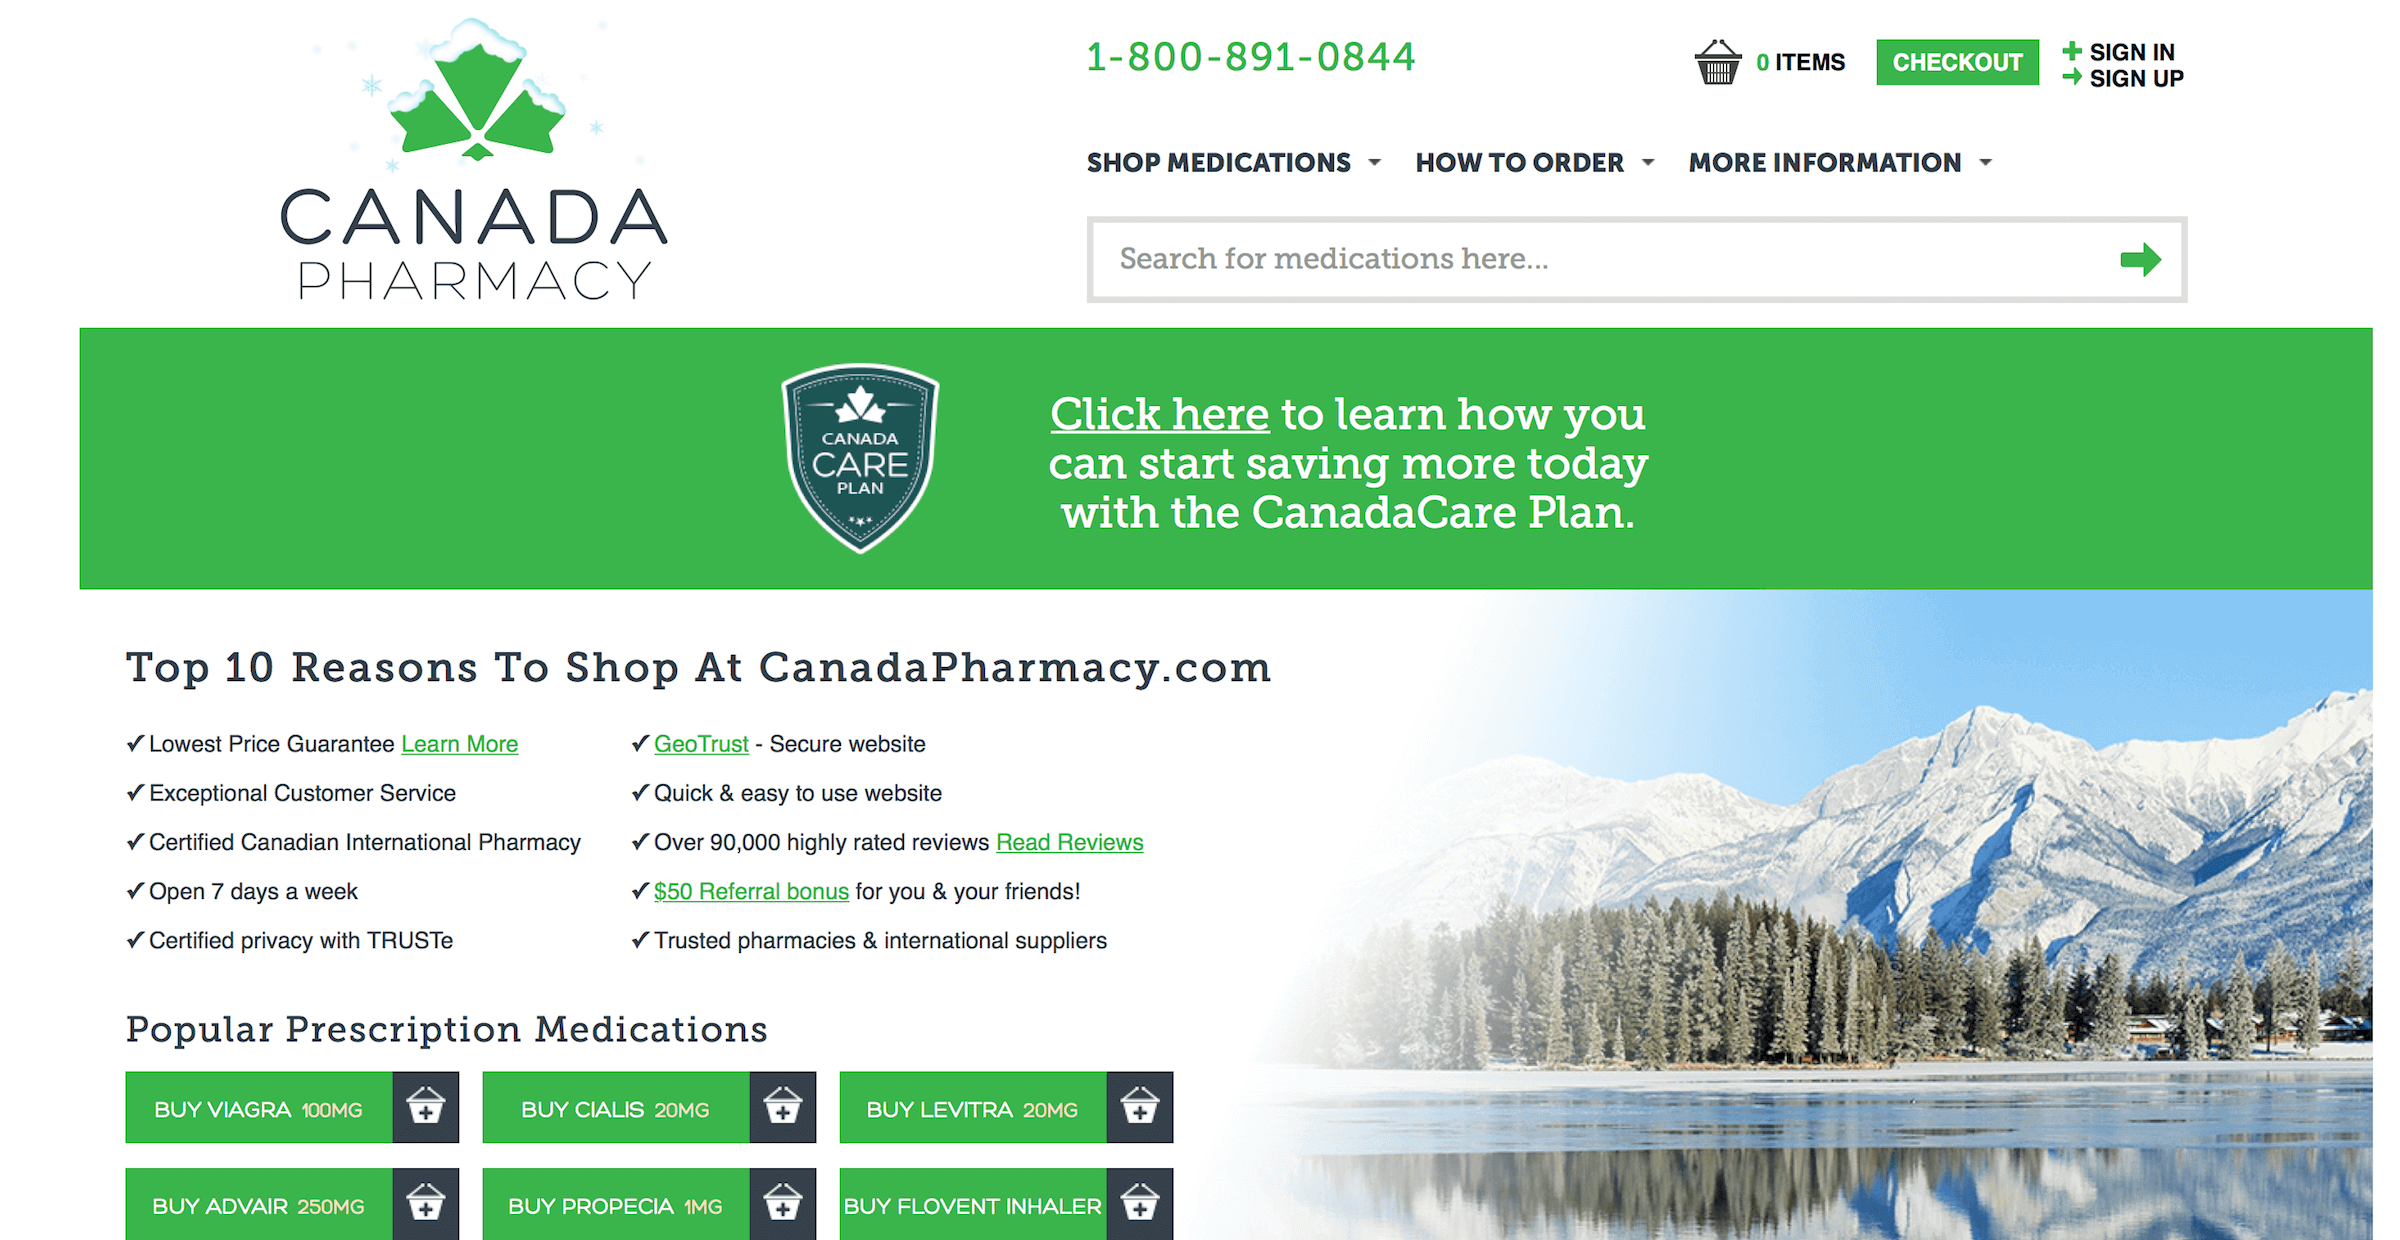 CanadaPharmacy.com Pharmacy Review